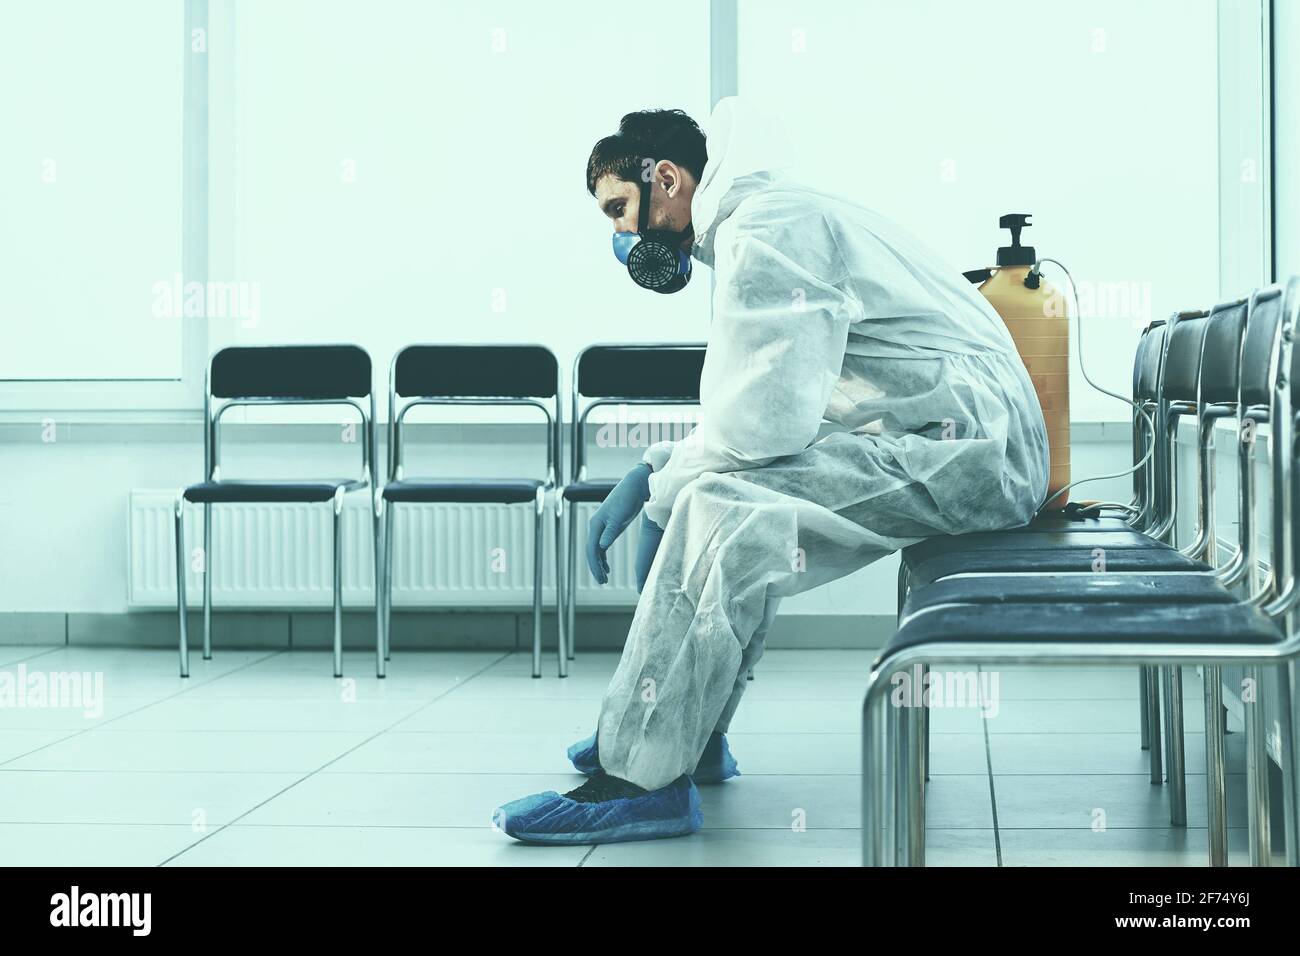 tired medical orderly in a protective suit sitting in a public waiting room. Stock Photo